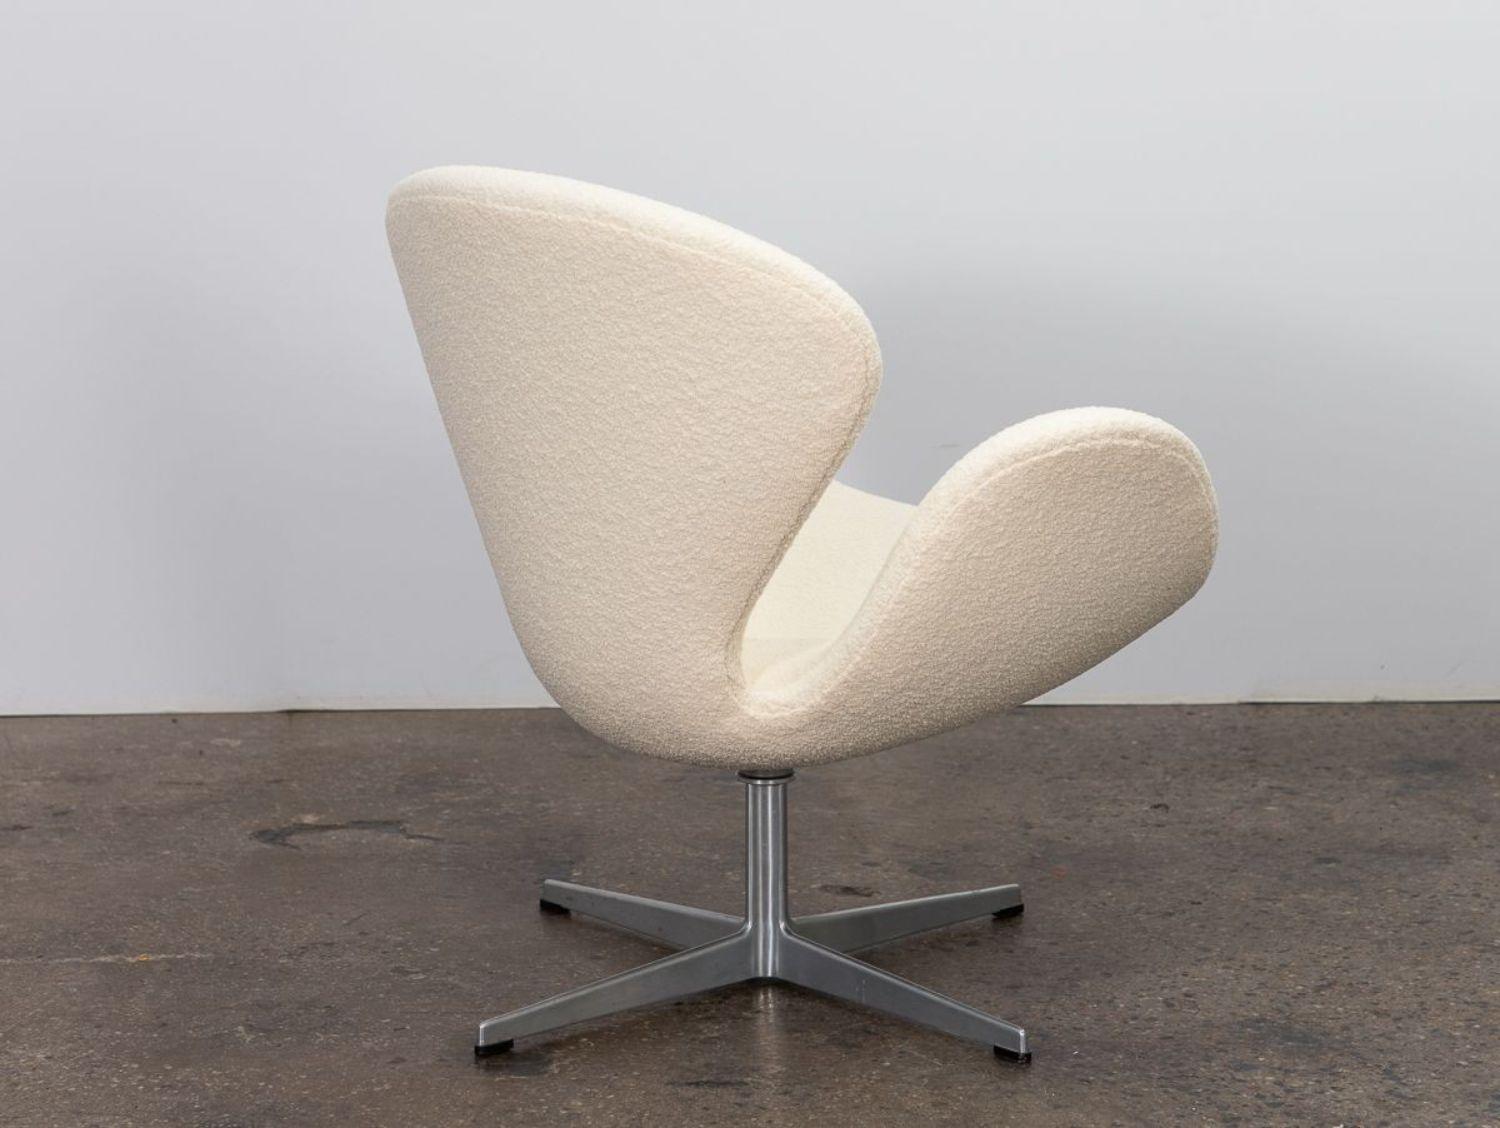 Arne Jacobsen Swan Chair in Knoll Pearl Boucle In Excellent Condition For Sale In Brooklyn, NY